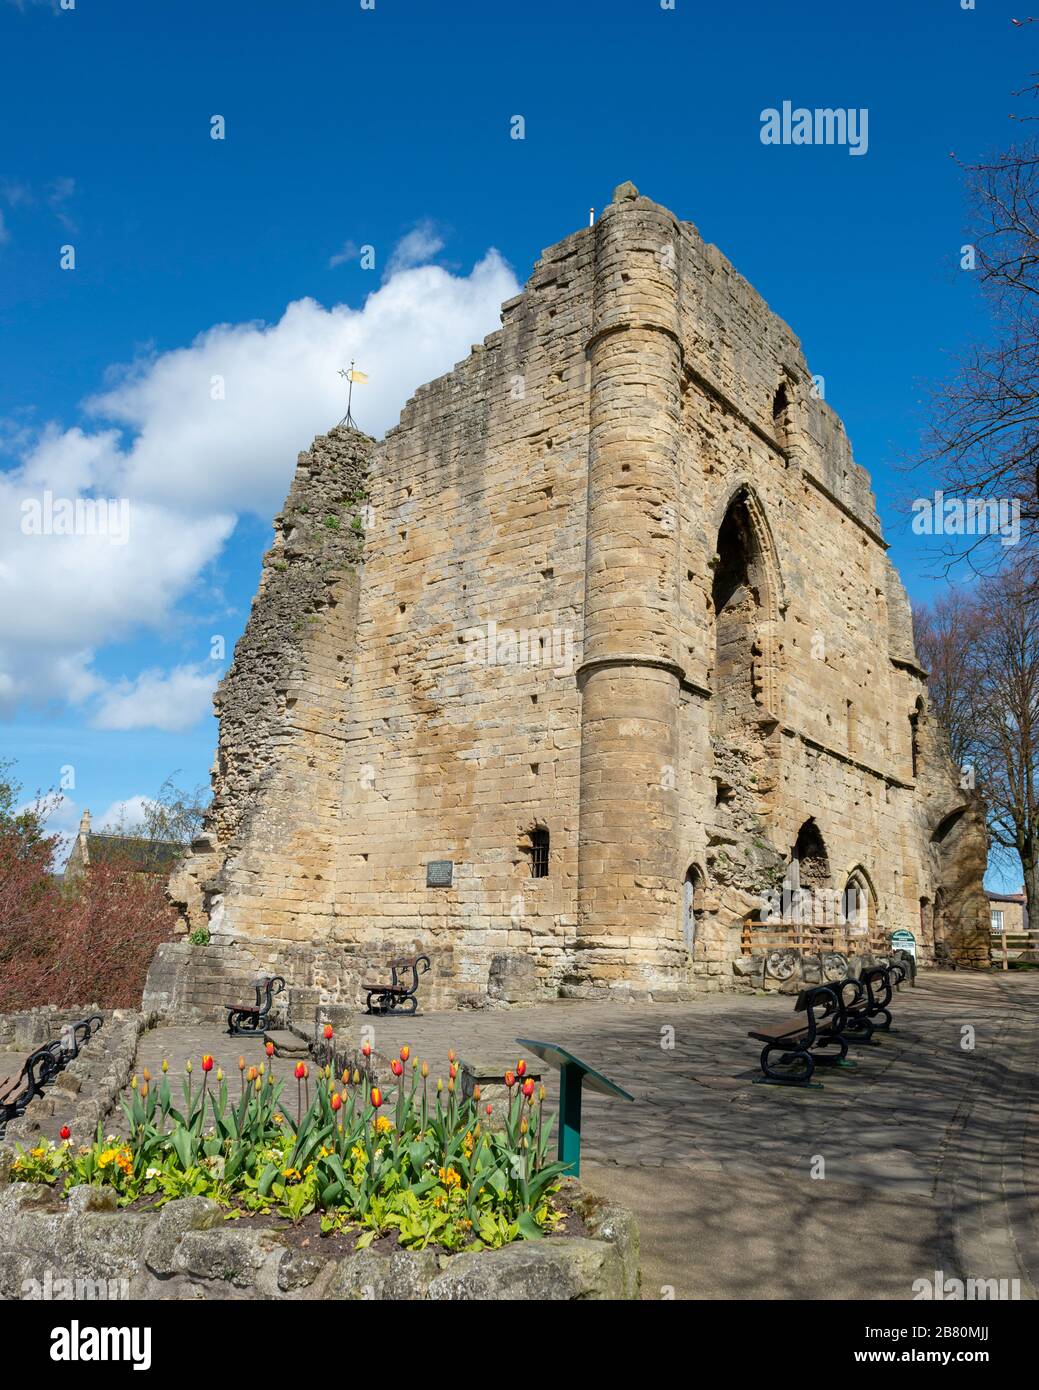 Spring view of the ruined stone keep of Knaresborough Castle, once a medieval fortress, now a popular visitor attraction in this Yorkshire town Stock Photo